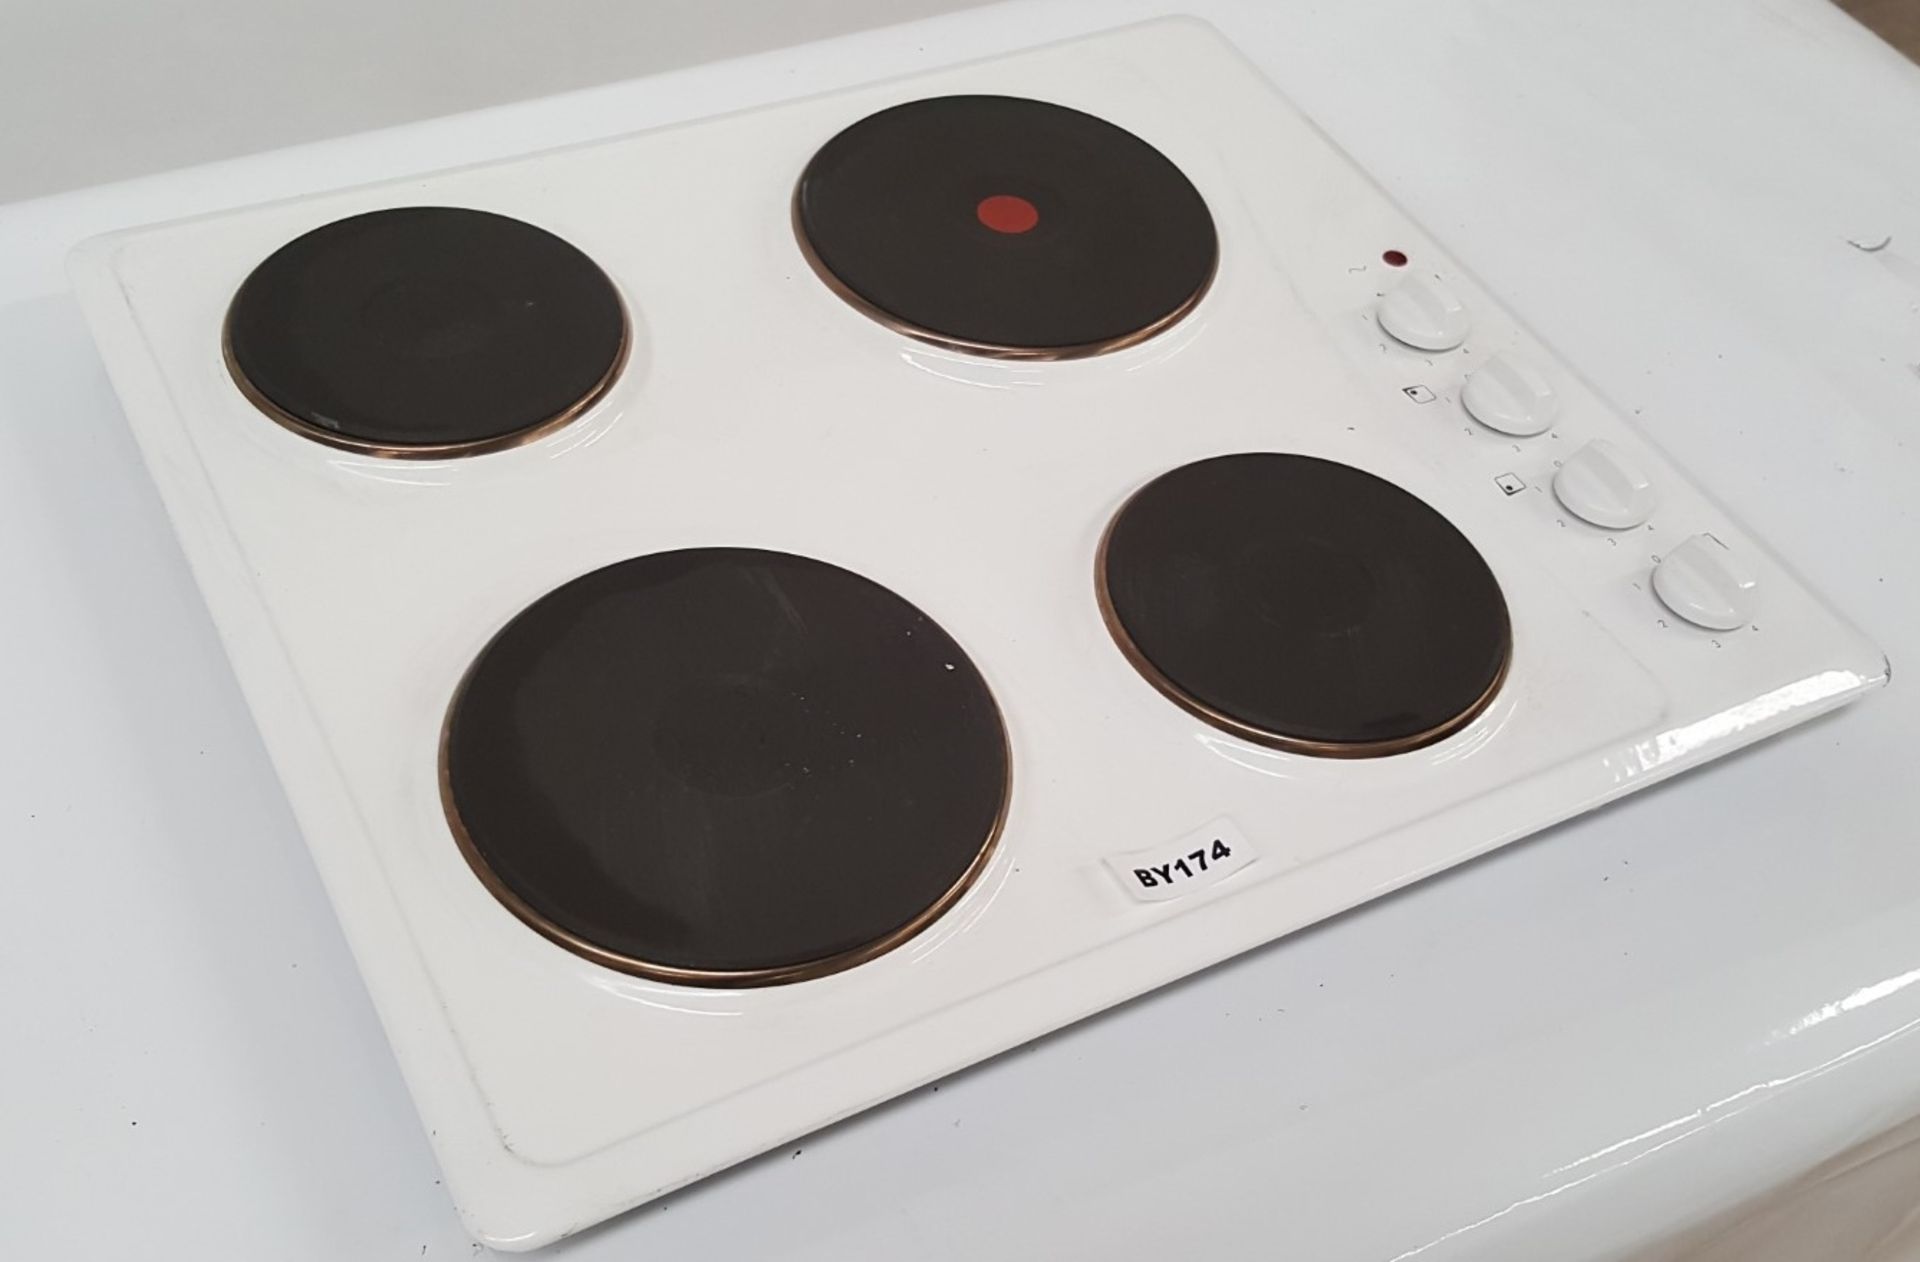 1 x Ignis AKL7000/WH 60 cm Electric Hob White Finish - Ref BY174 - Image 5 of 5